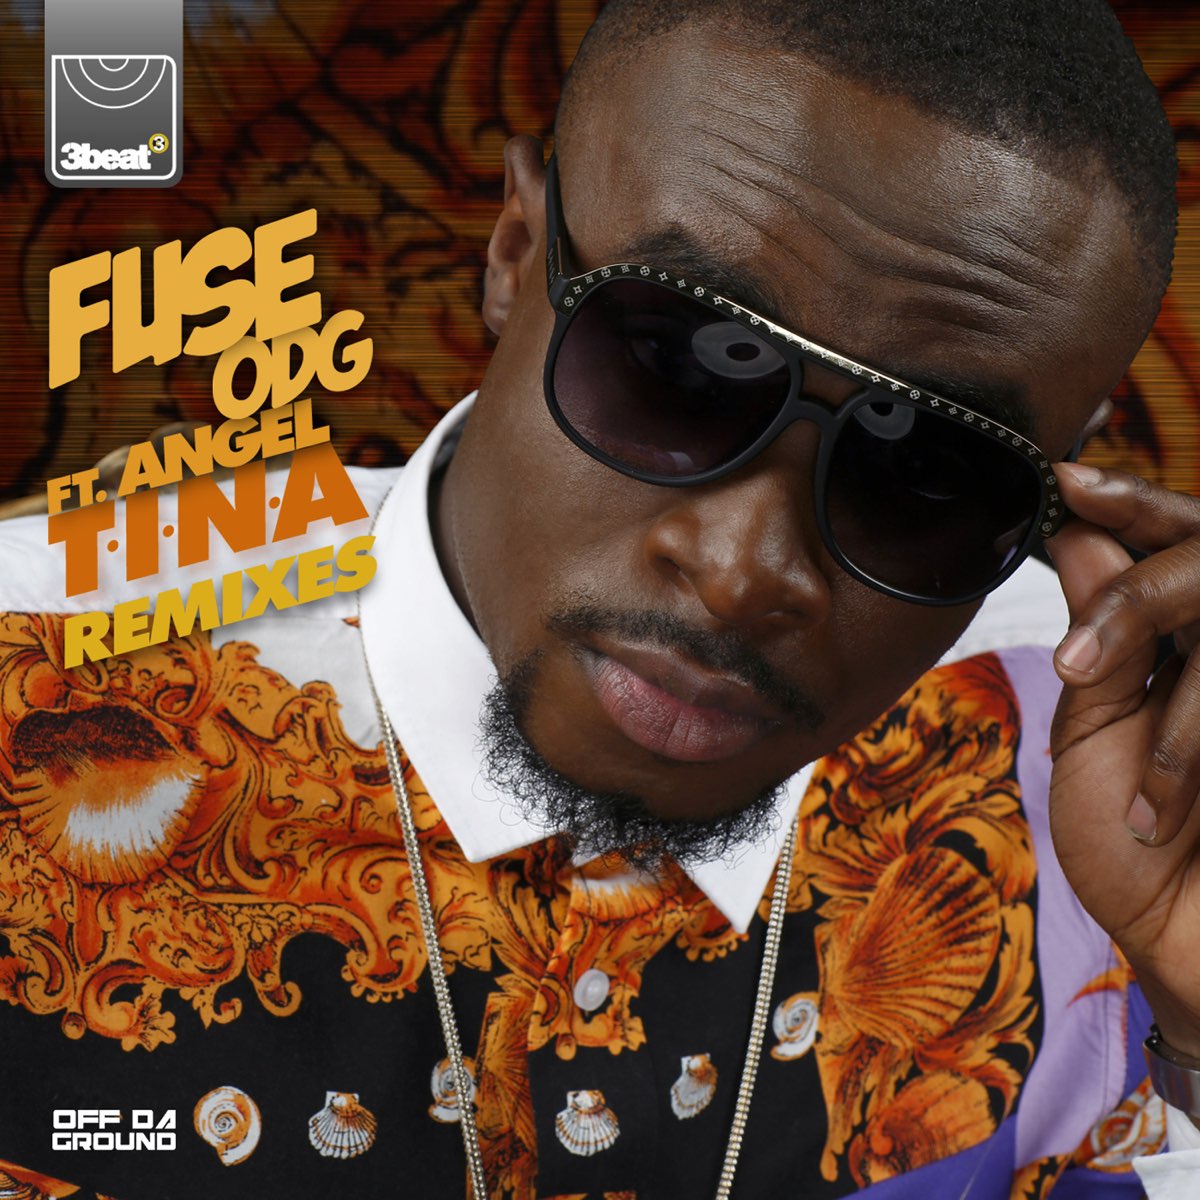 Fuse ODG featuring Angel — T.I.N.A. cover artwork